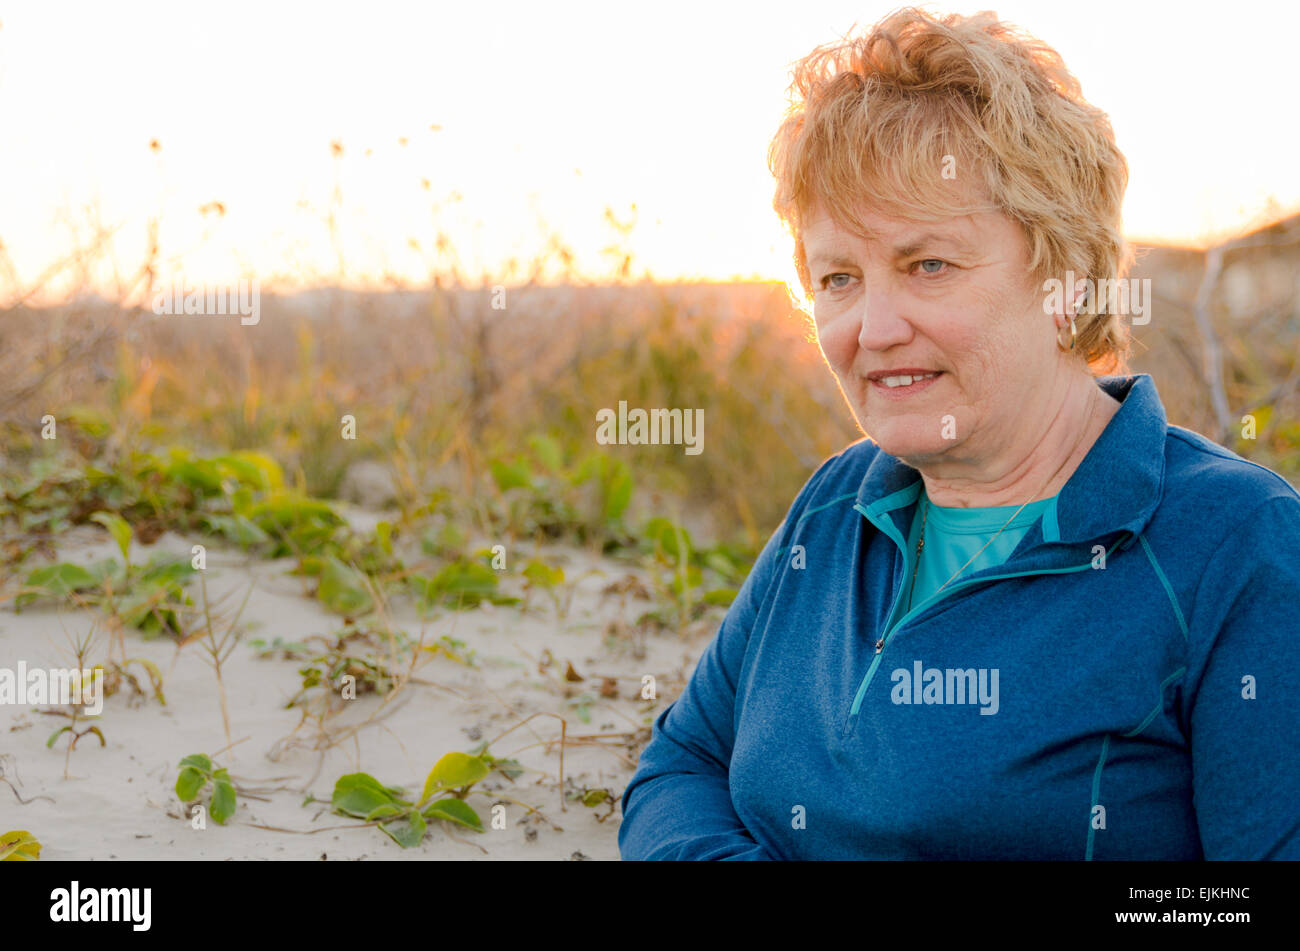 Senior female age 60-65 standing with the sun to her back in the sand dunes near the beach looking relaxed and happy Stock Photo